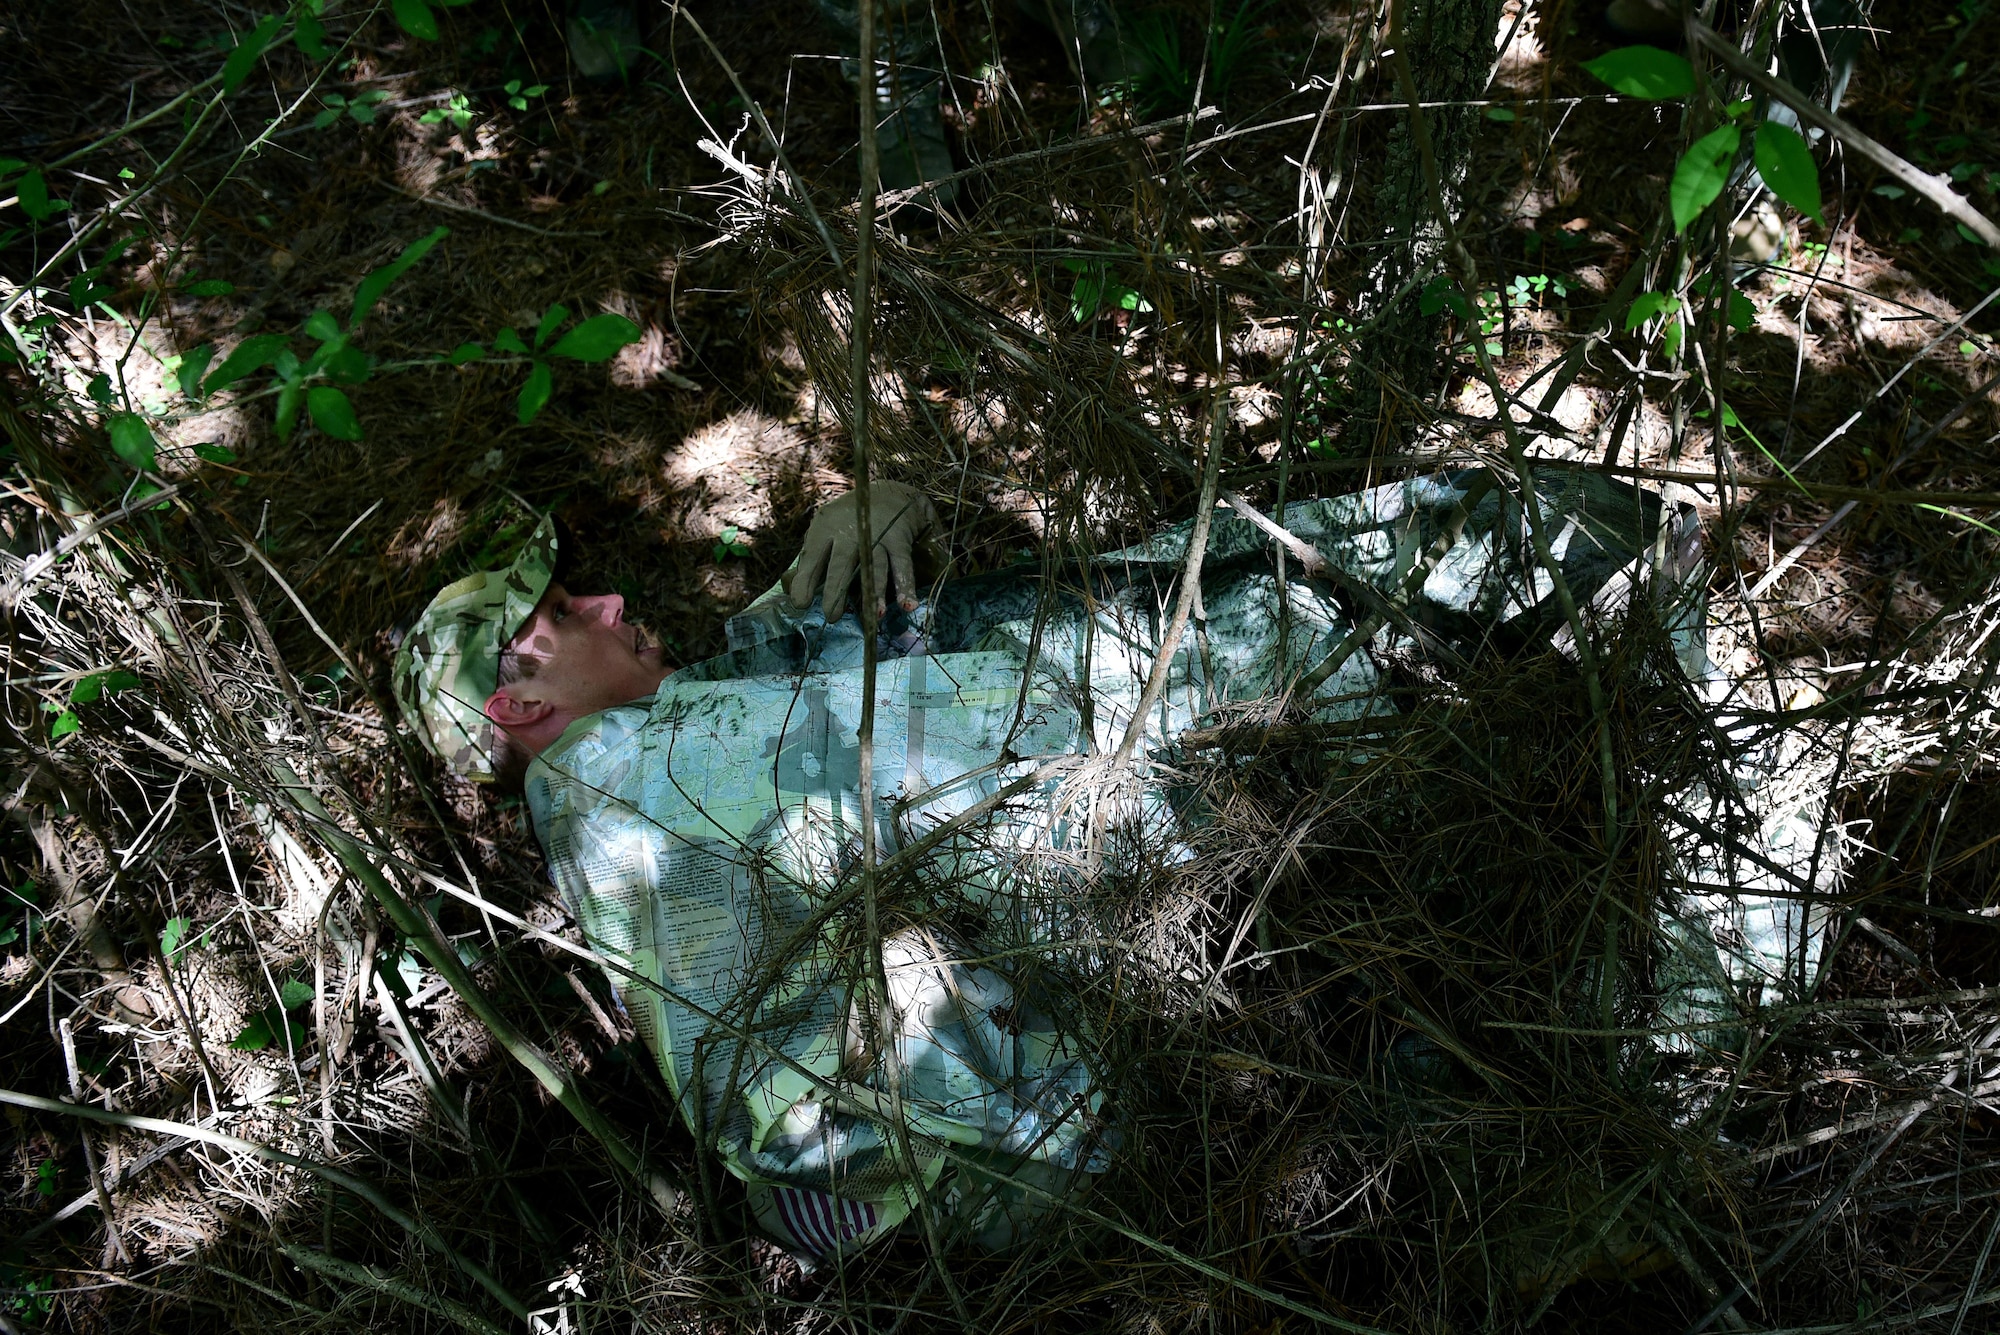 Staff Sgt. Joshua Krape, 4th Operations Support Squadron survival, evasion, resistance and escape specialist, demonstrates how to quickly create a shelter using the environment and a map during a combat survival training course, June 27, 2017, at Howell Woods, Four Oaks, North Carolina. According to Krape, having a shelter that blends into the environment can keep downed aircrew alive when they are trapped behind enemy lines. (U.S. Air Force photo by Airman 1st Class Kenneth Boyton)